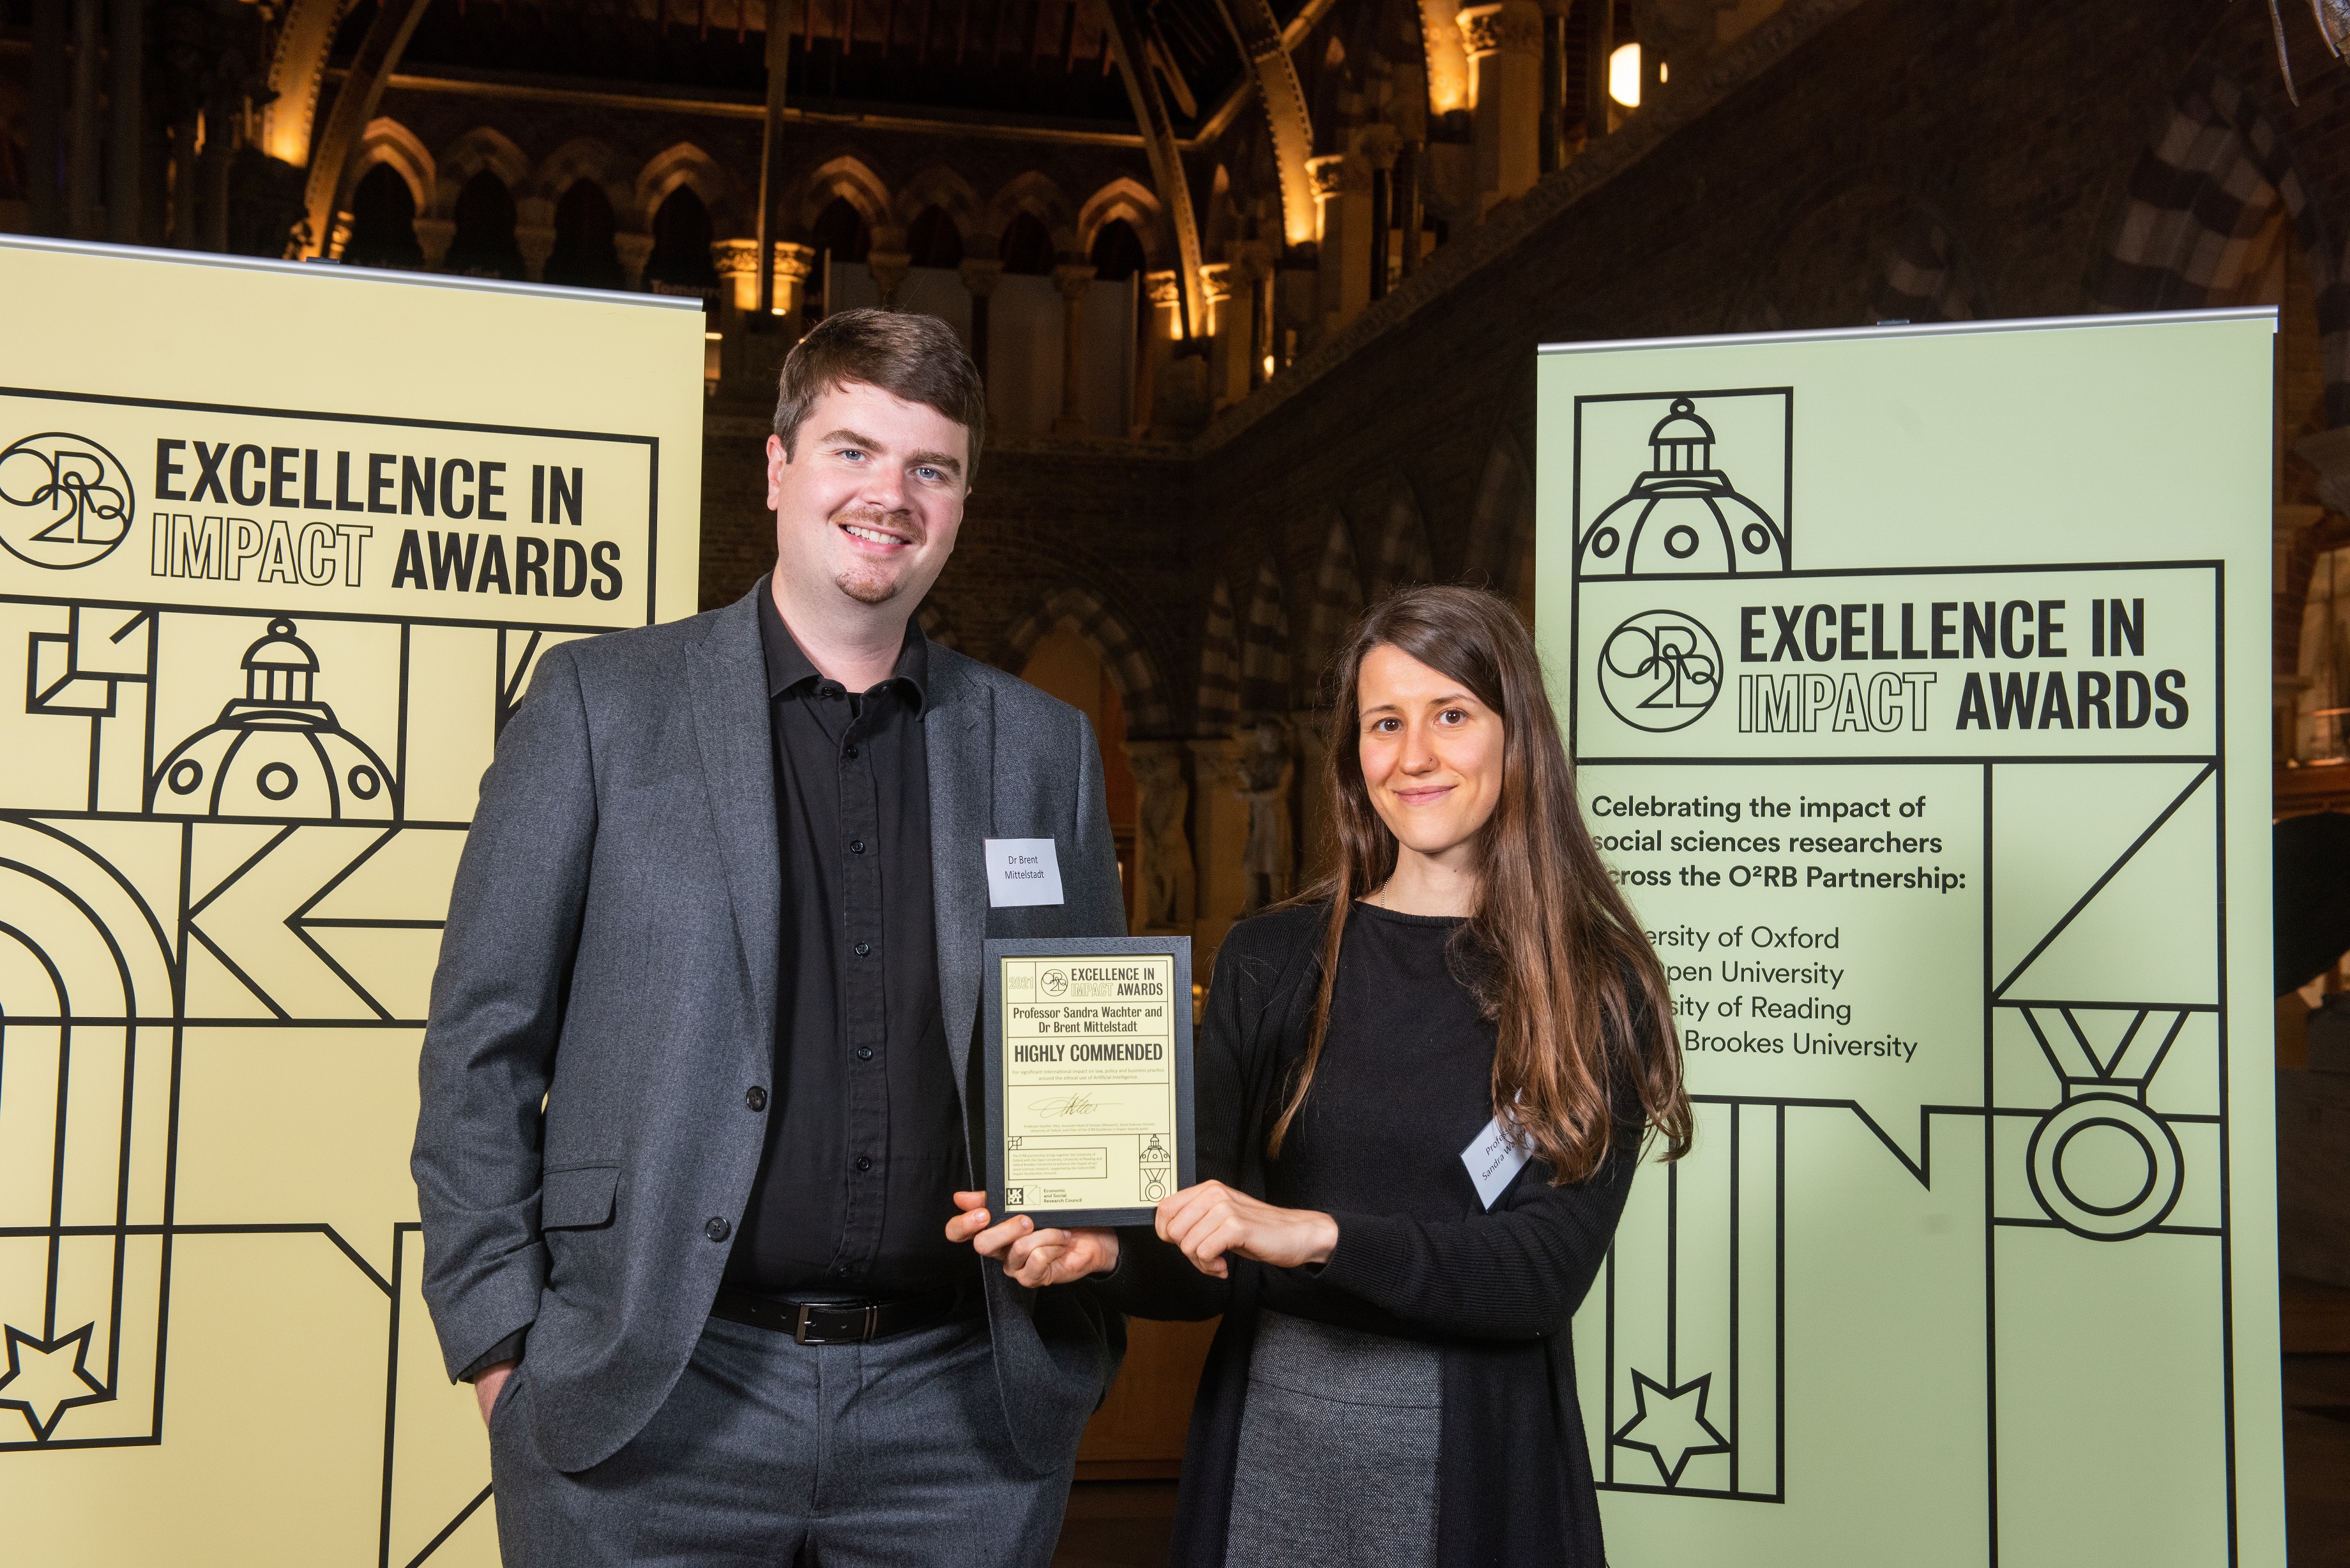 Professor Sandra Wachter and Dr Brent Mittelstadt hold their Highly Commended impact award, flanked by event branding at the awards reception